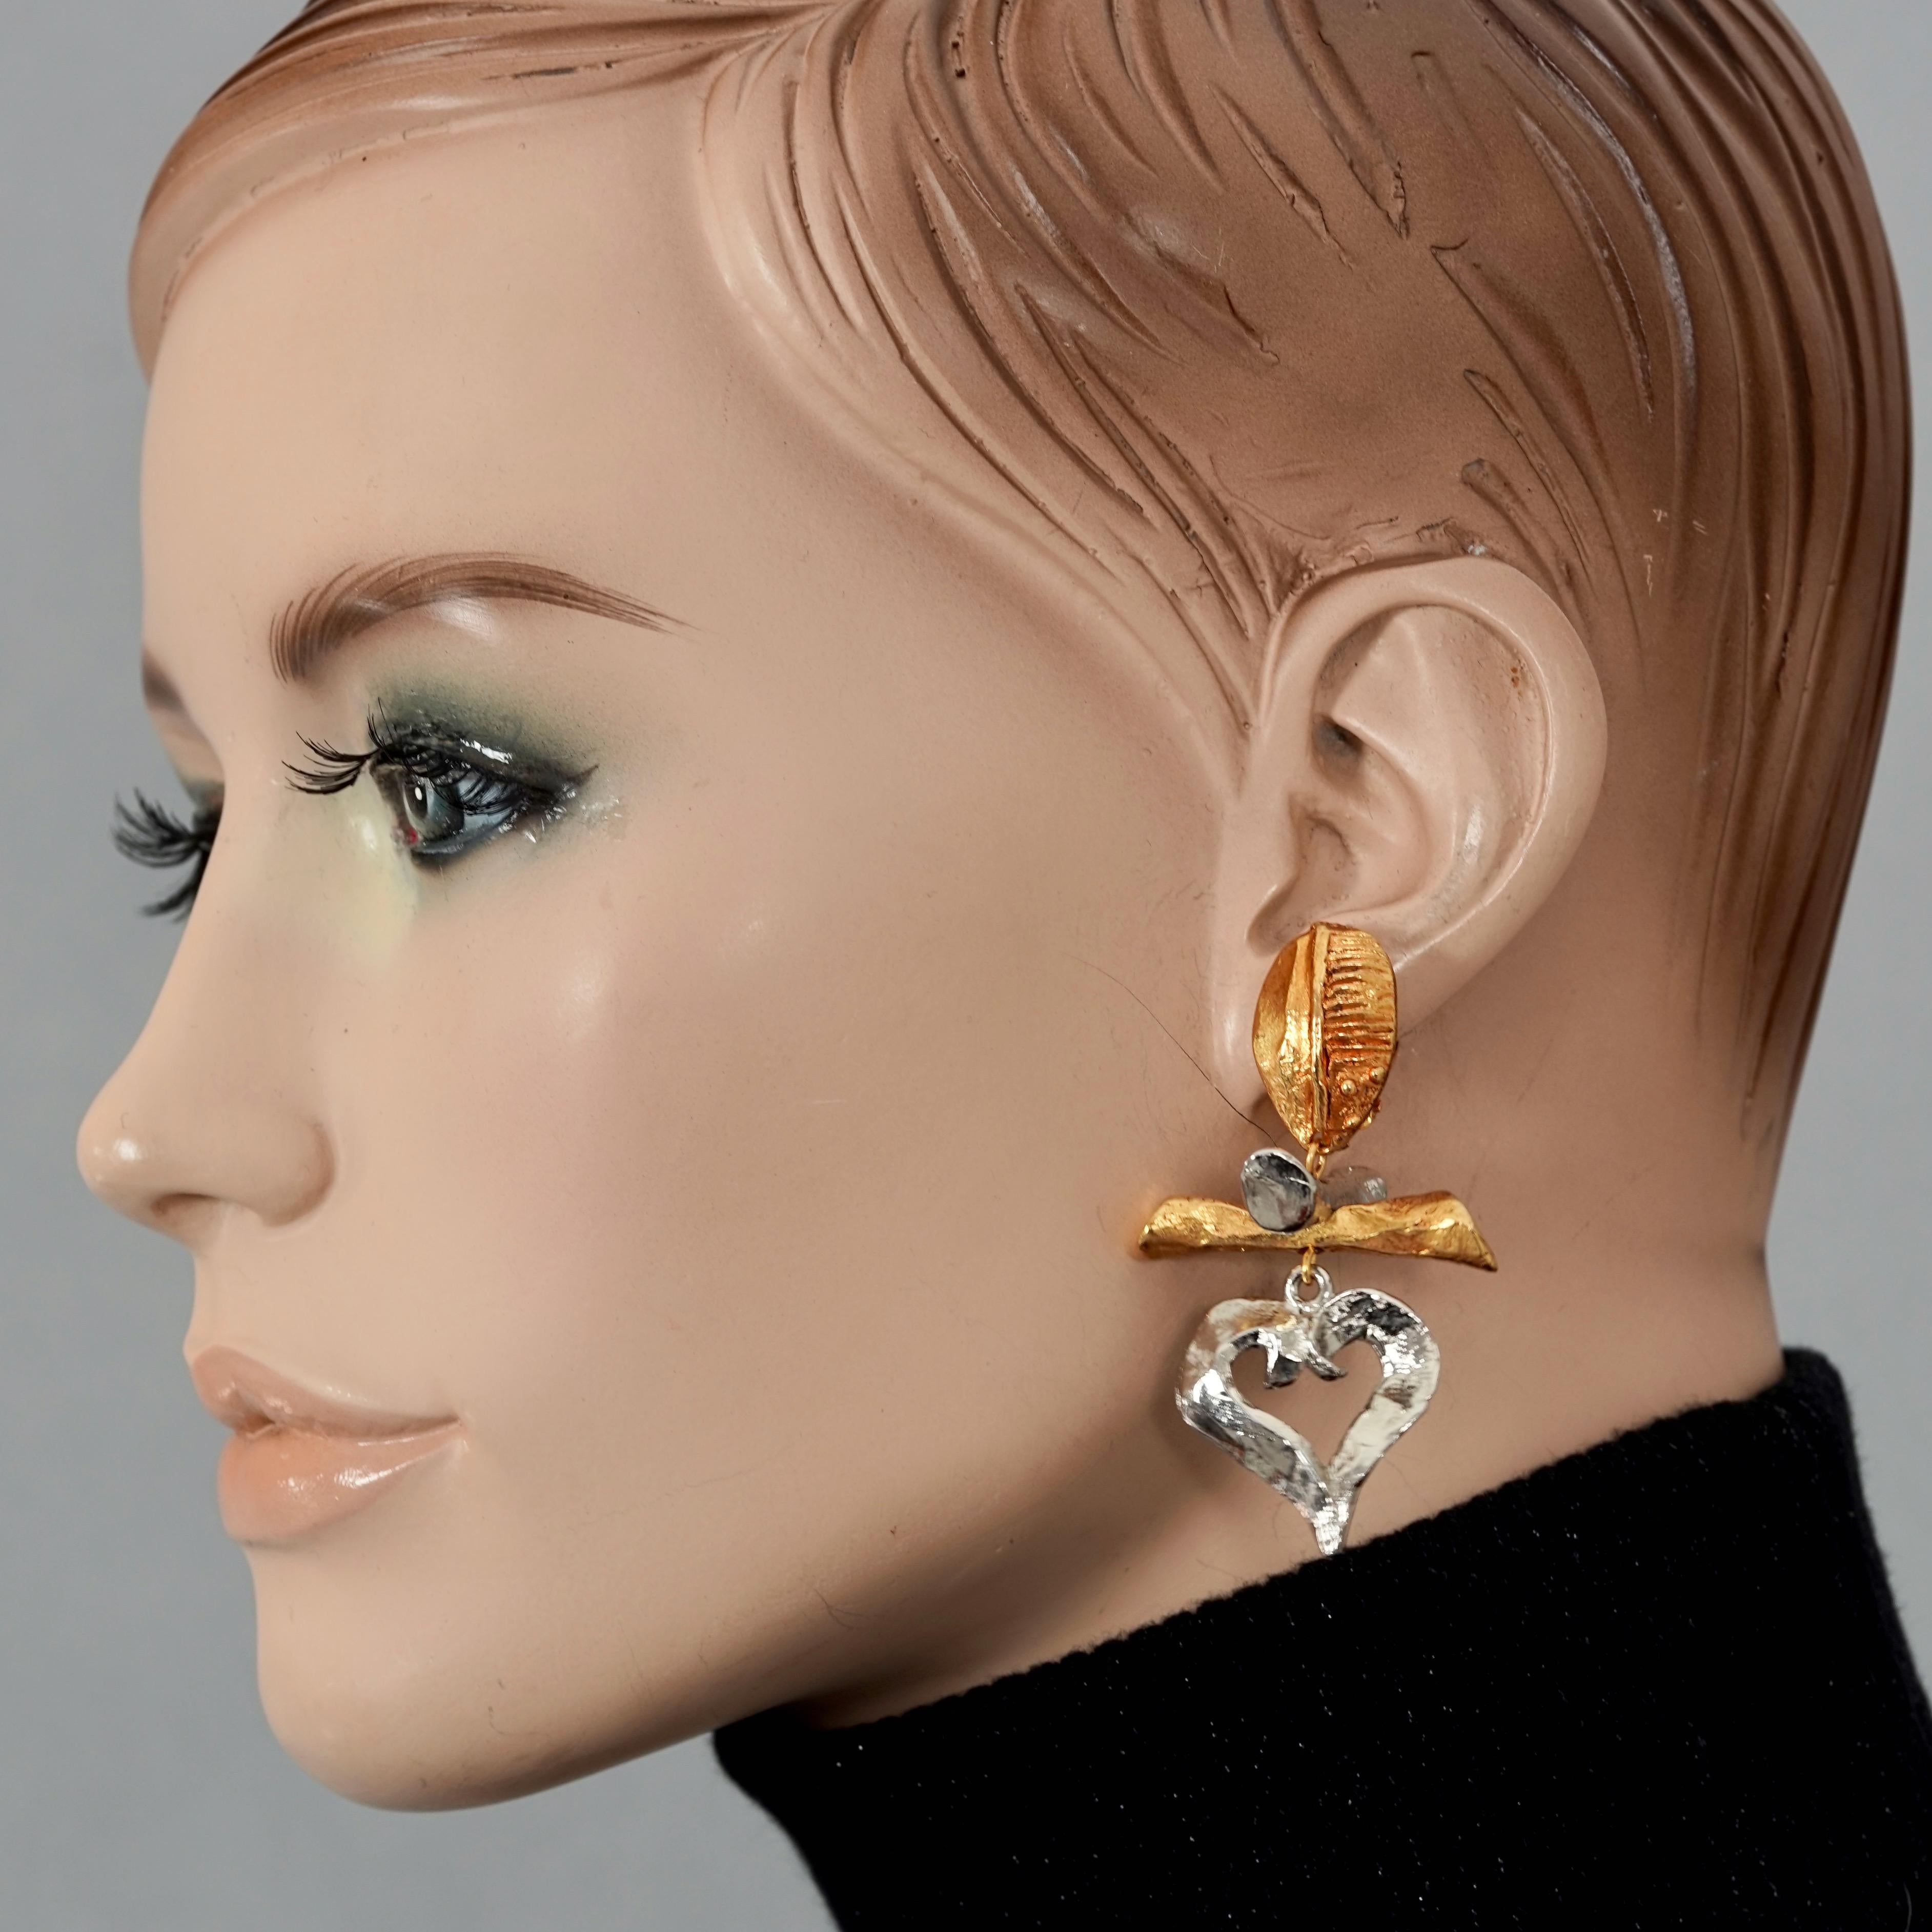 Vintage CHRISTIAN LACROIX Heart Charm Two Tone Dangling Earrings

Measurements:
Height: 2.36 inches (6 cm)
Width: 1.33 inches (3.4 cm)
Weight per Earring: 20 grams

Features:
- 100% Authentic CHRISTIAN LACROIX.
- Heart charm dangling earrings.
-